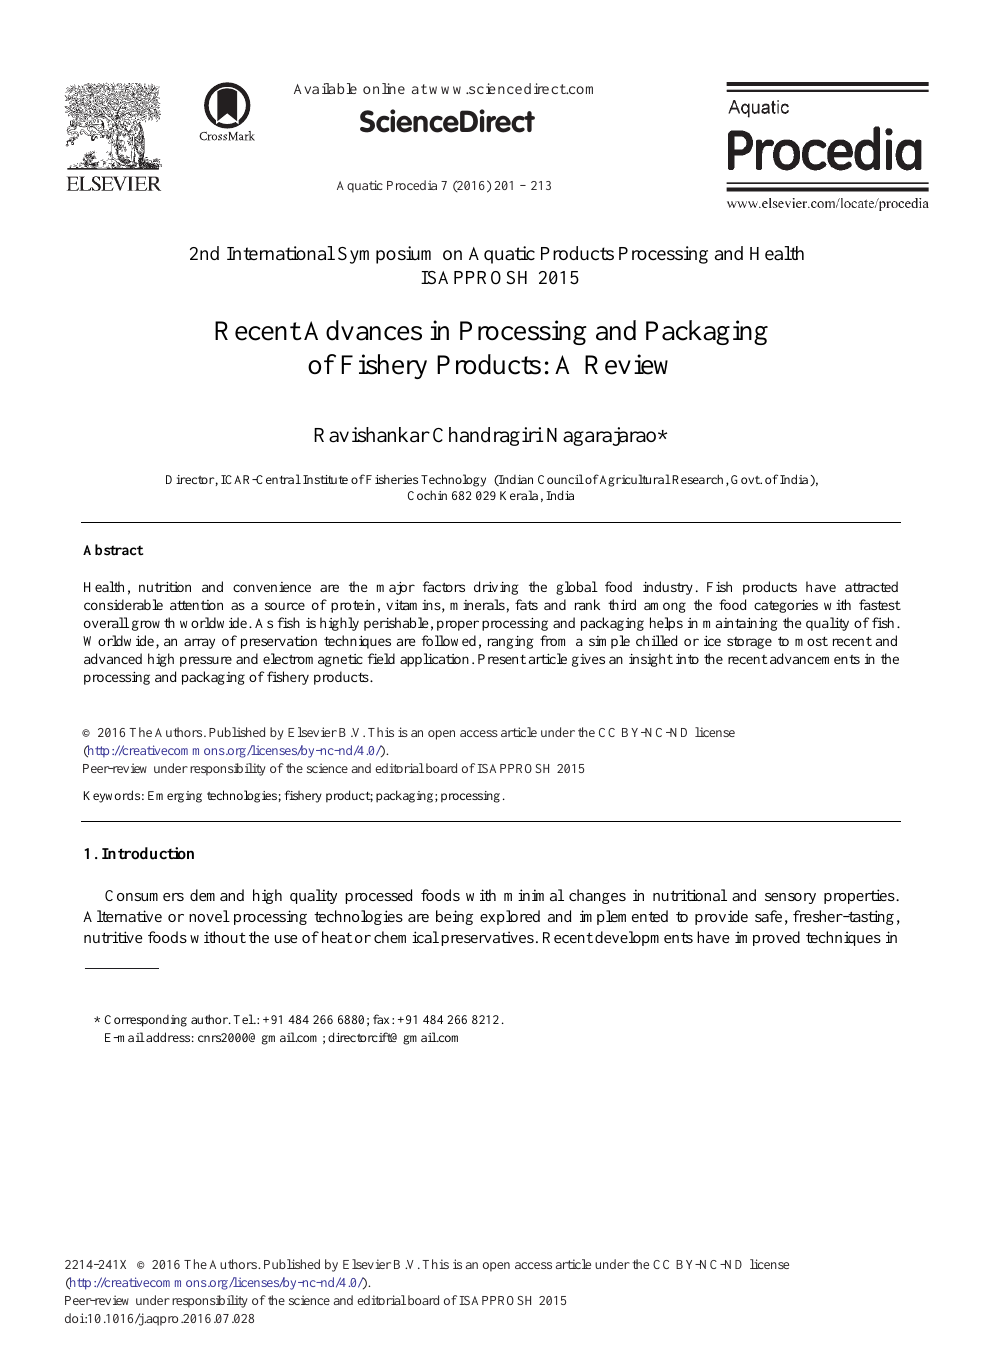 Recent Advances In Processing And Packaging Of Fishery Products A Review Topic Of Research Paper In Agriculture Forestry And Fisheries Download Scholarly Article Pdf And Read For Free On Cyberleninka Open